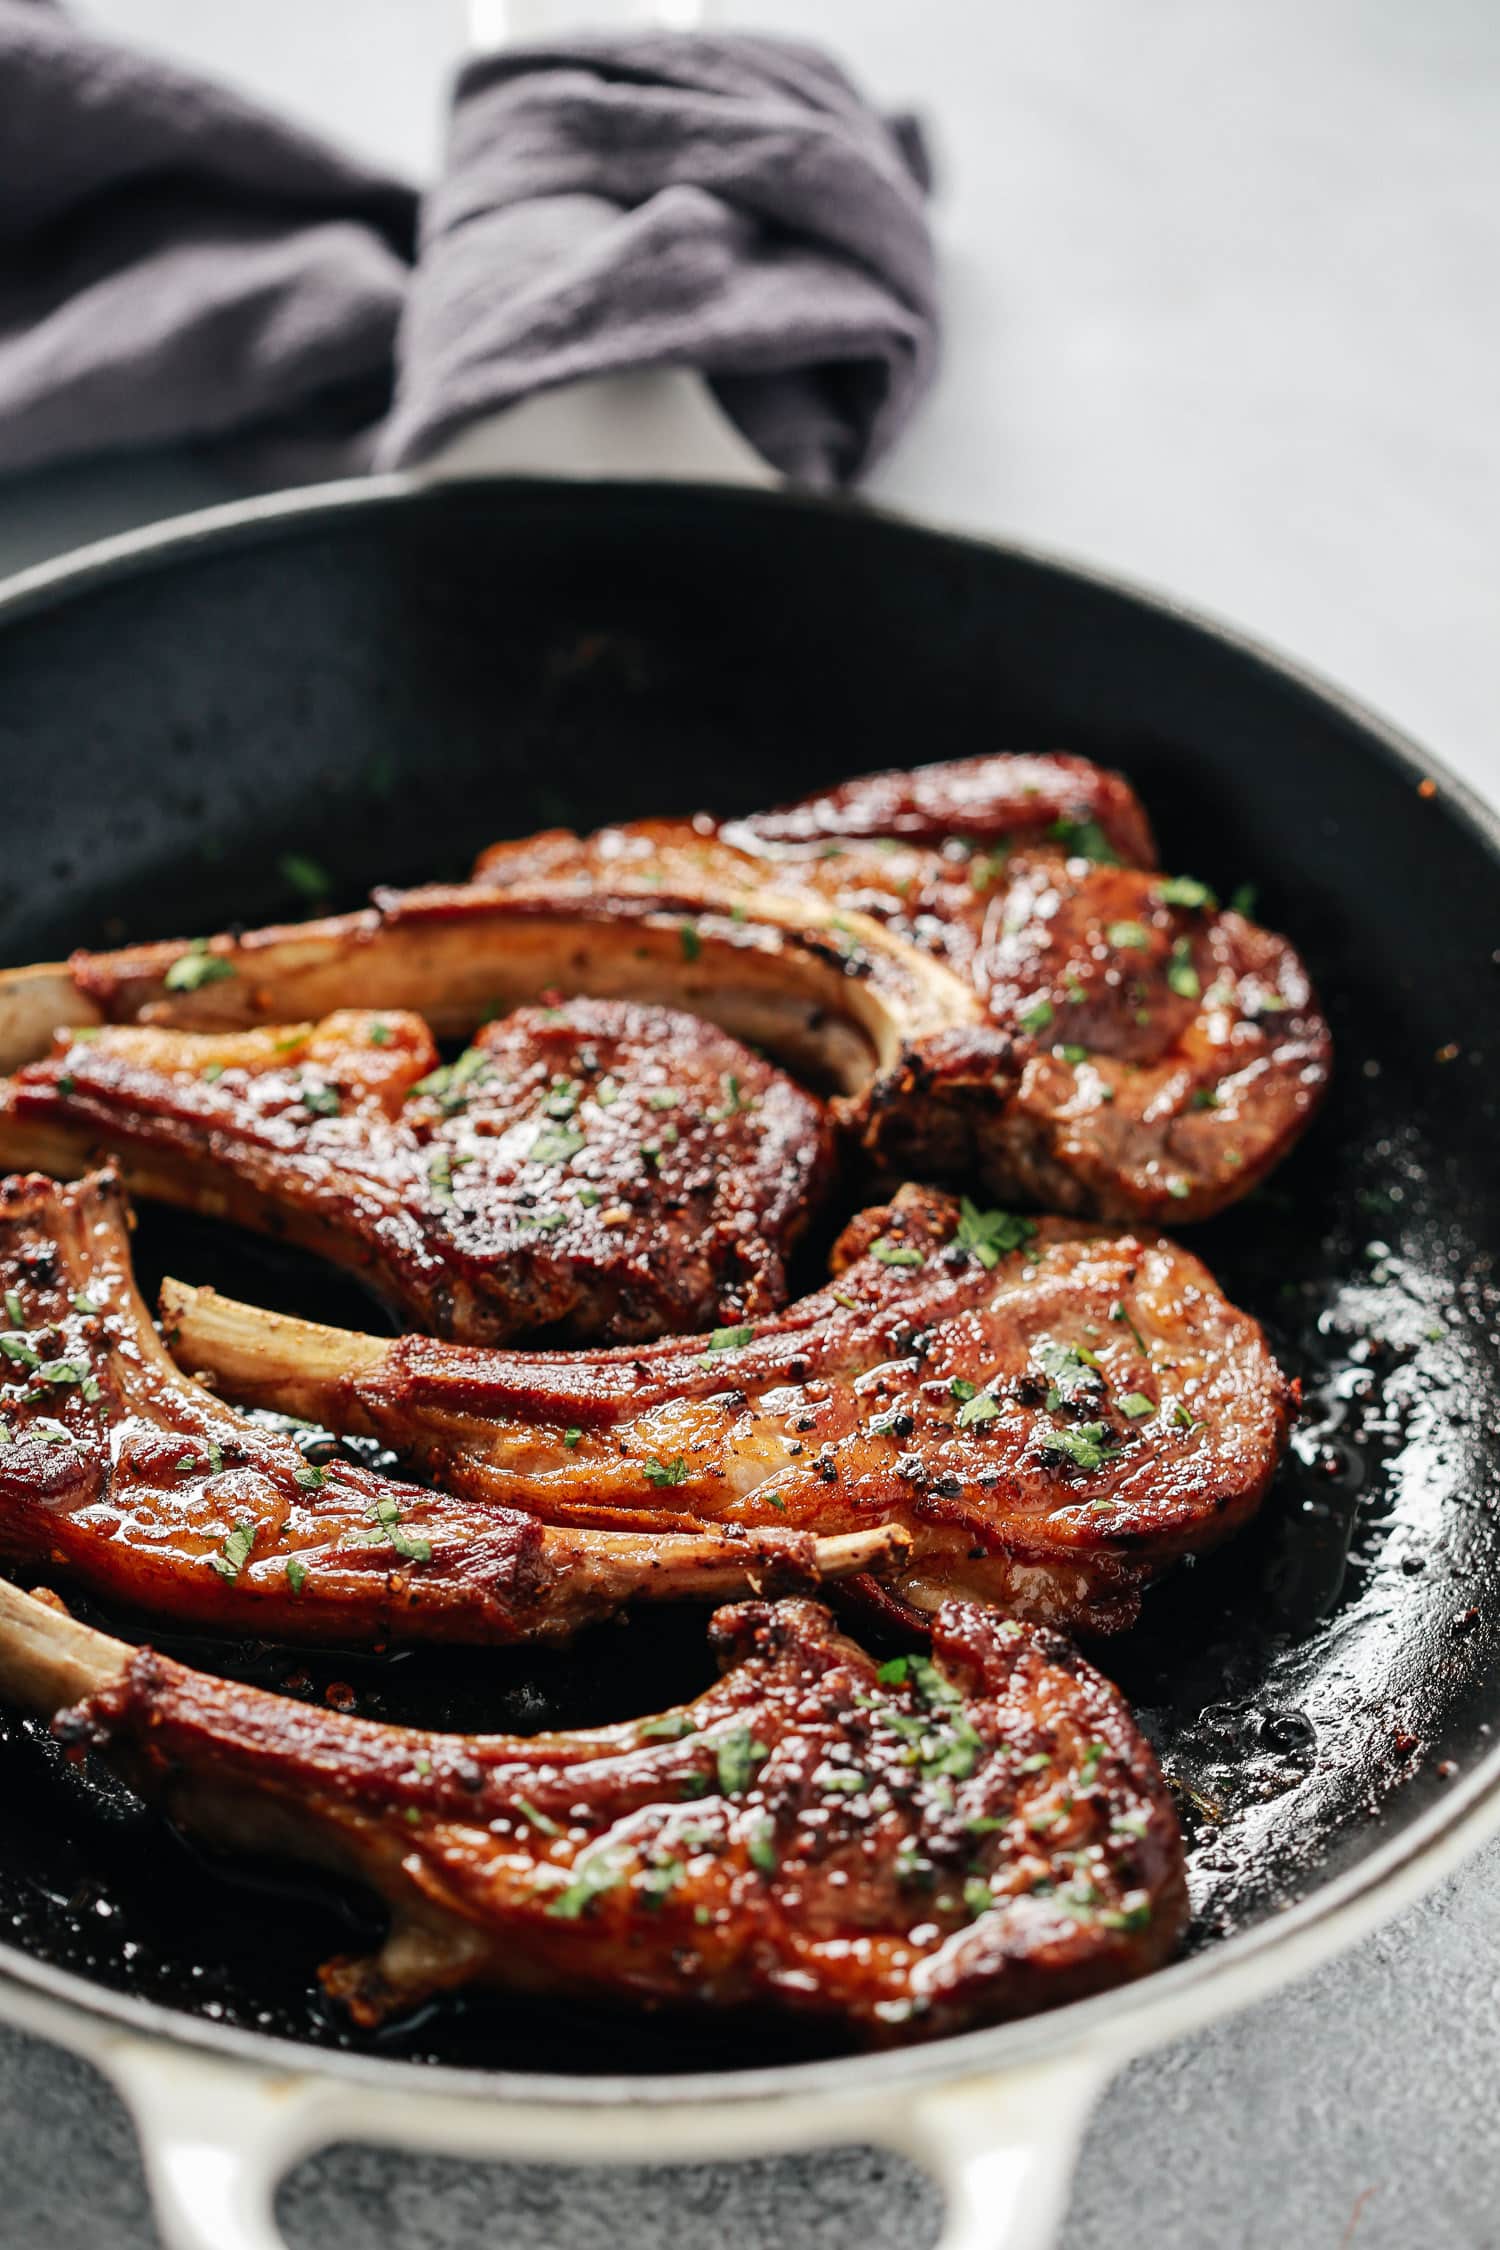 Overhead view of a skillet containing garlic butter lamb chop